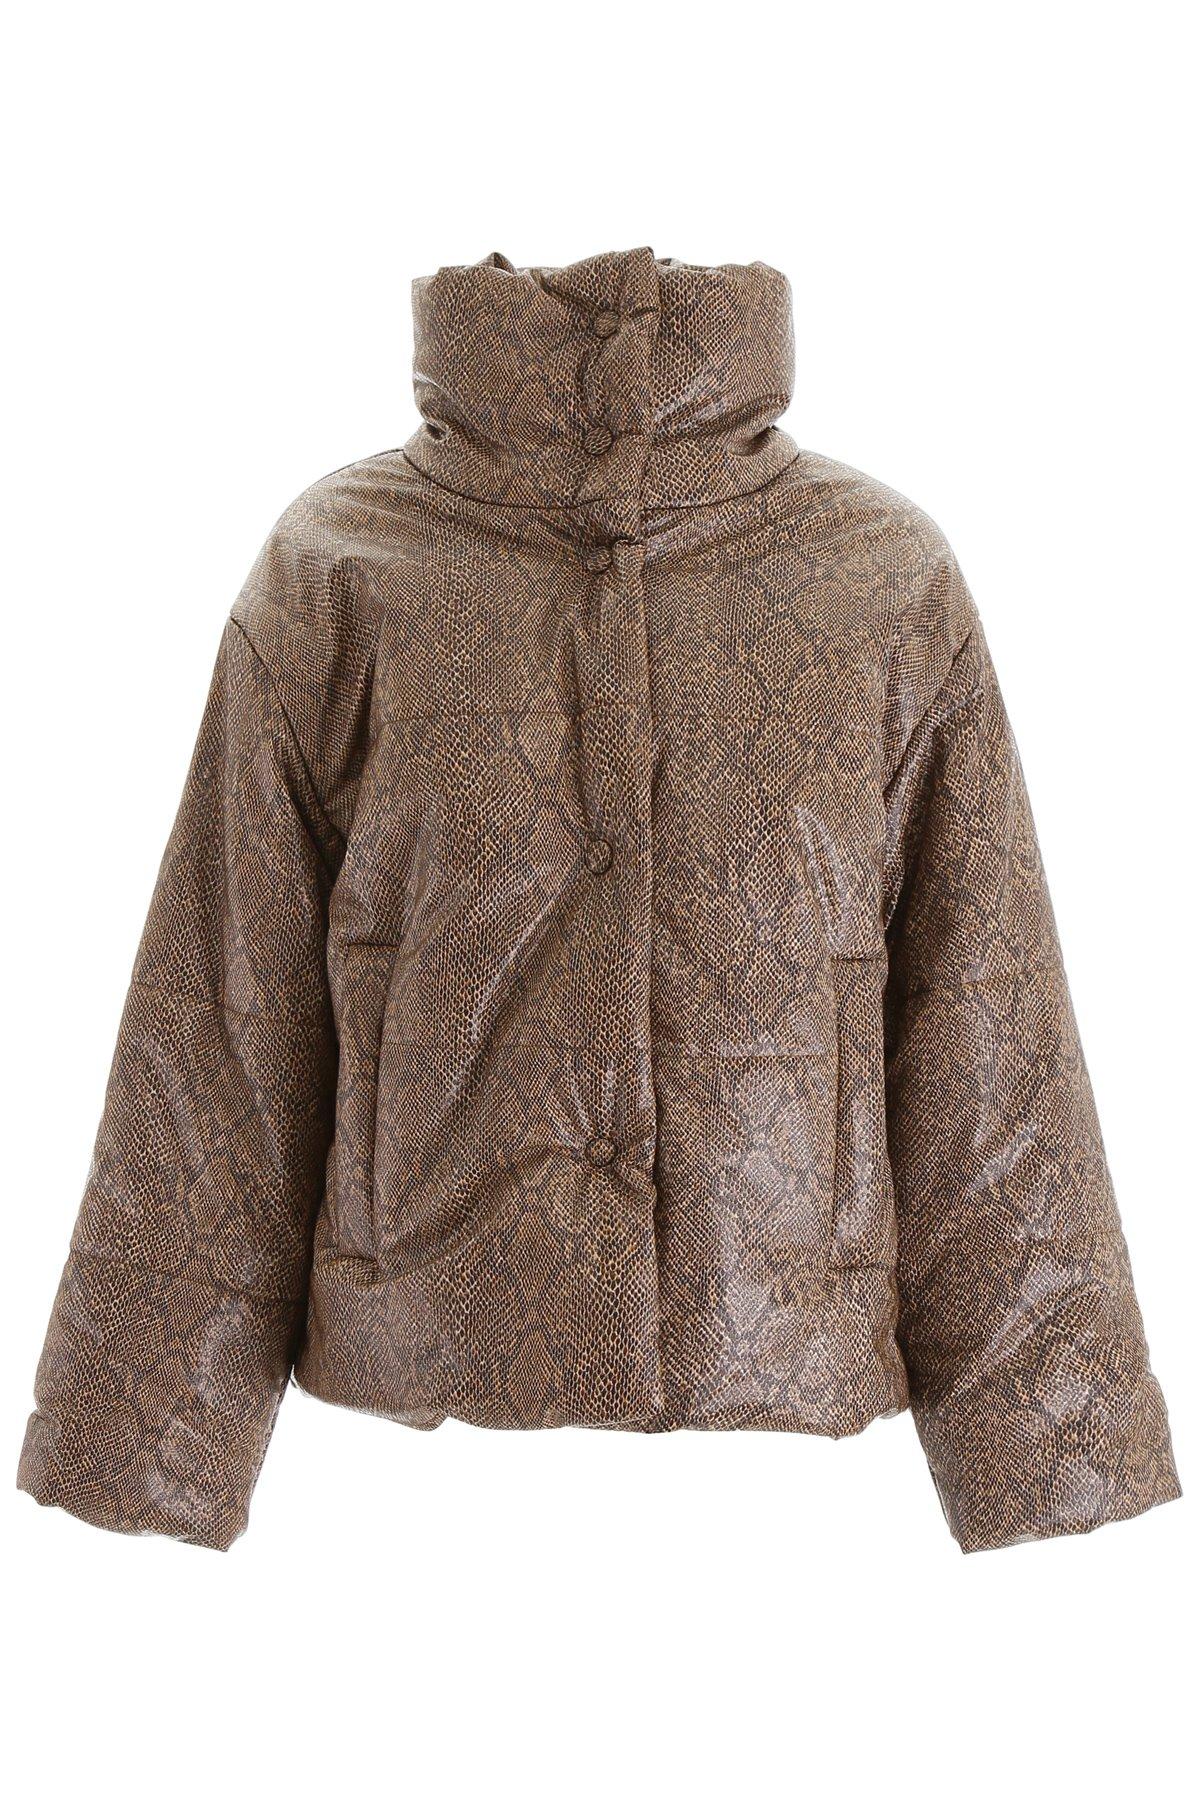 Nanushka Synthetic Hide Padded Jacket in Brown - Save 44% - Lyst